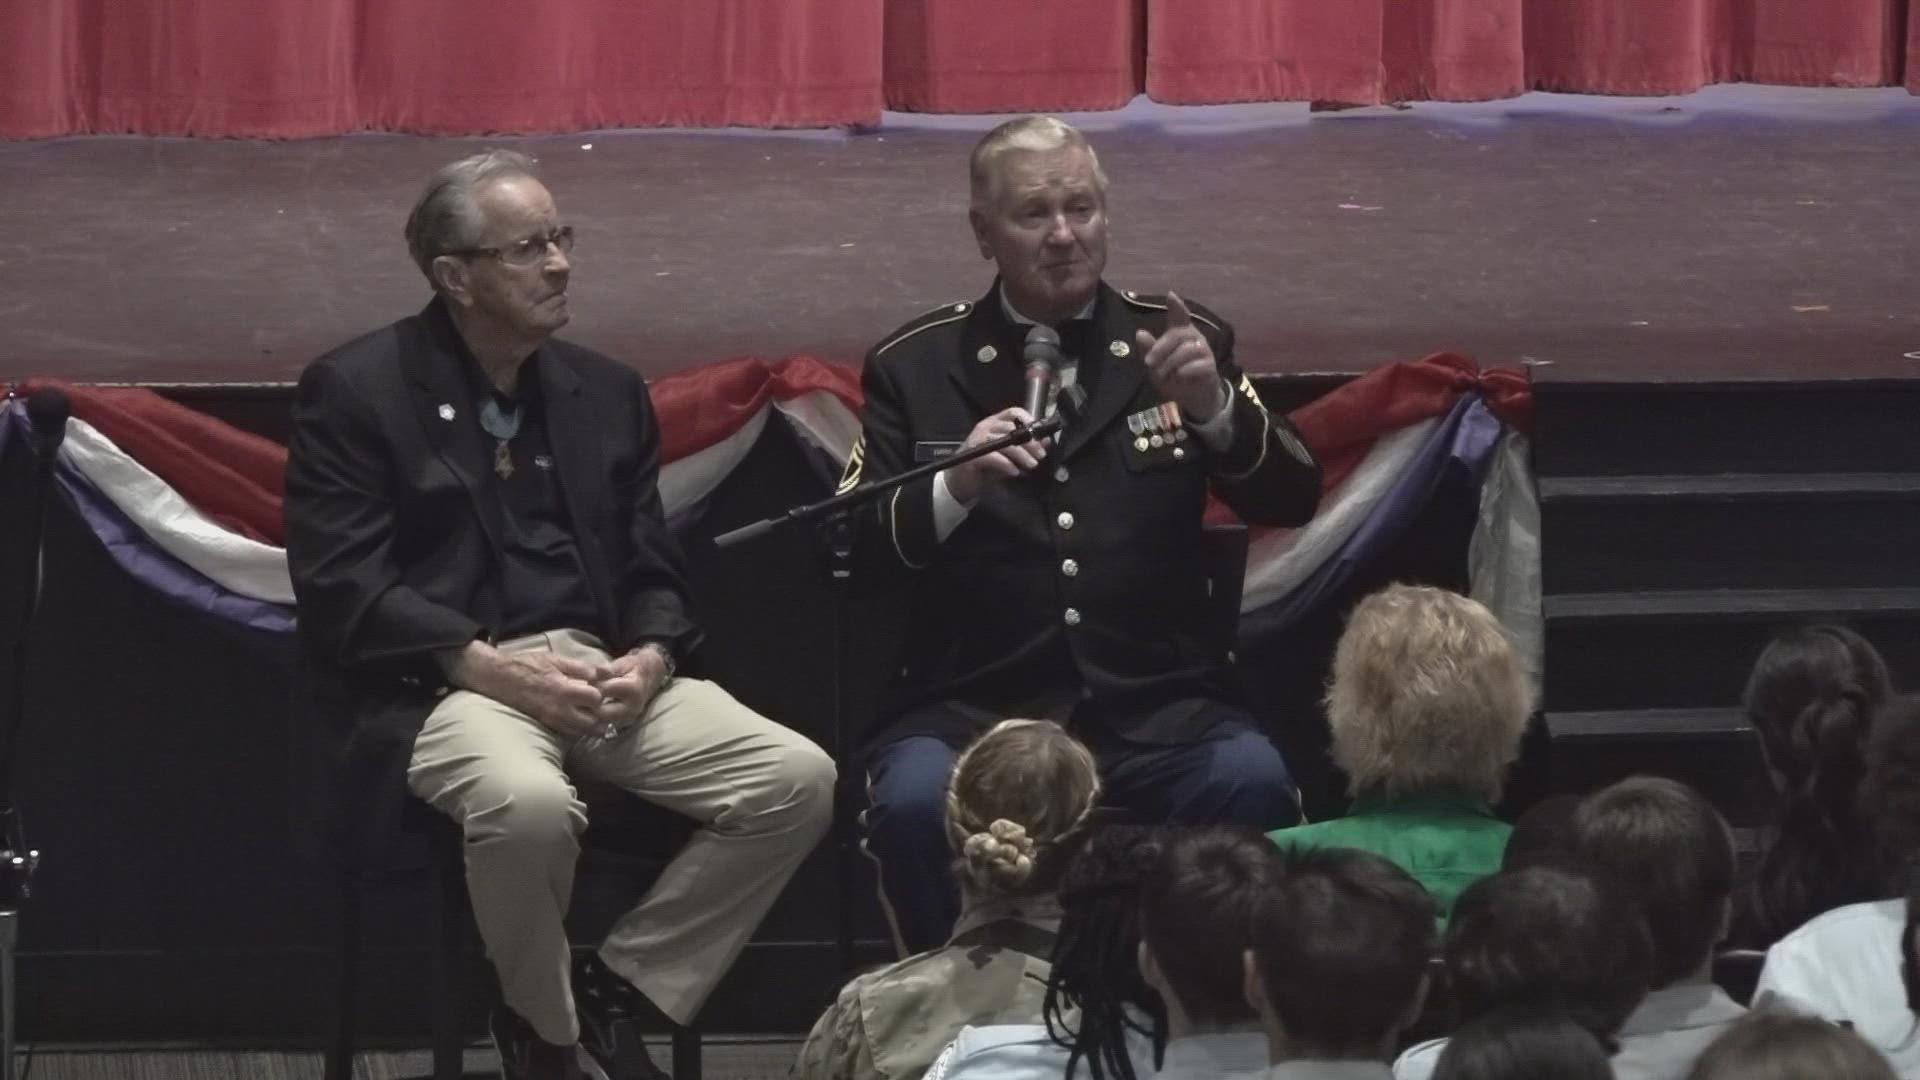 Hundreds of students across the area had a chance to meet some of the 65 living Medal of Honor recipients.